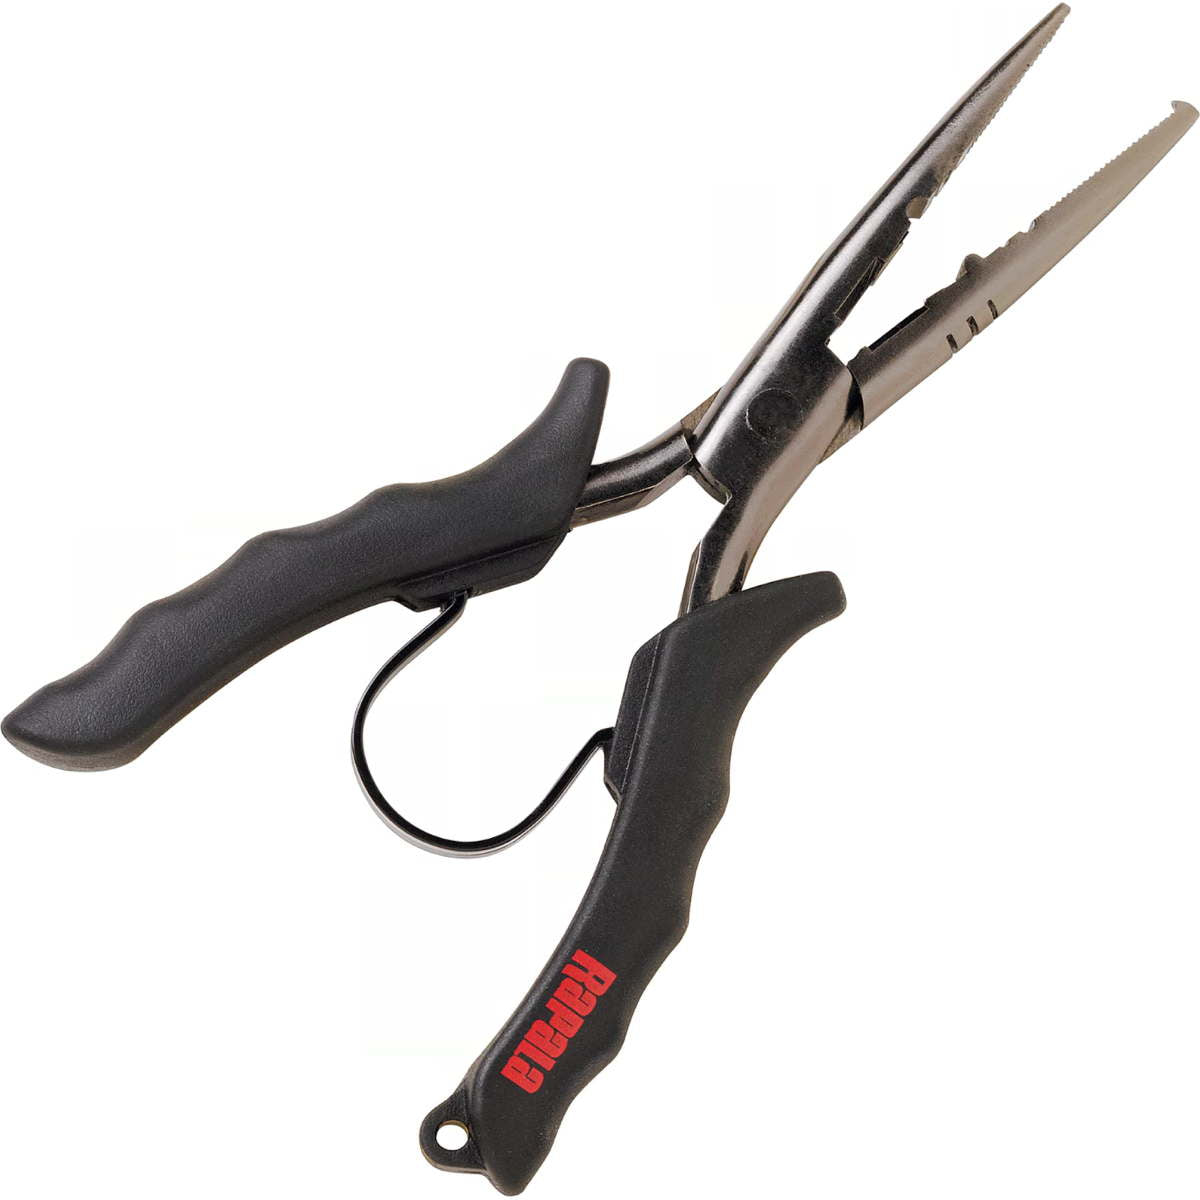 Photo of Rapala Stainless Steel Pliers for sale at United Tackle Shops.